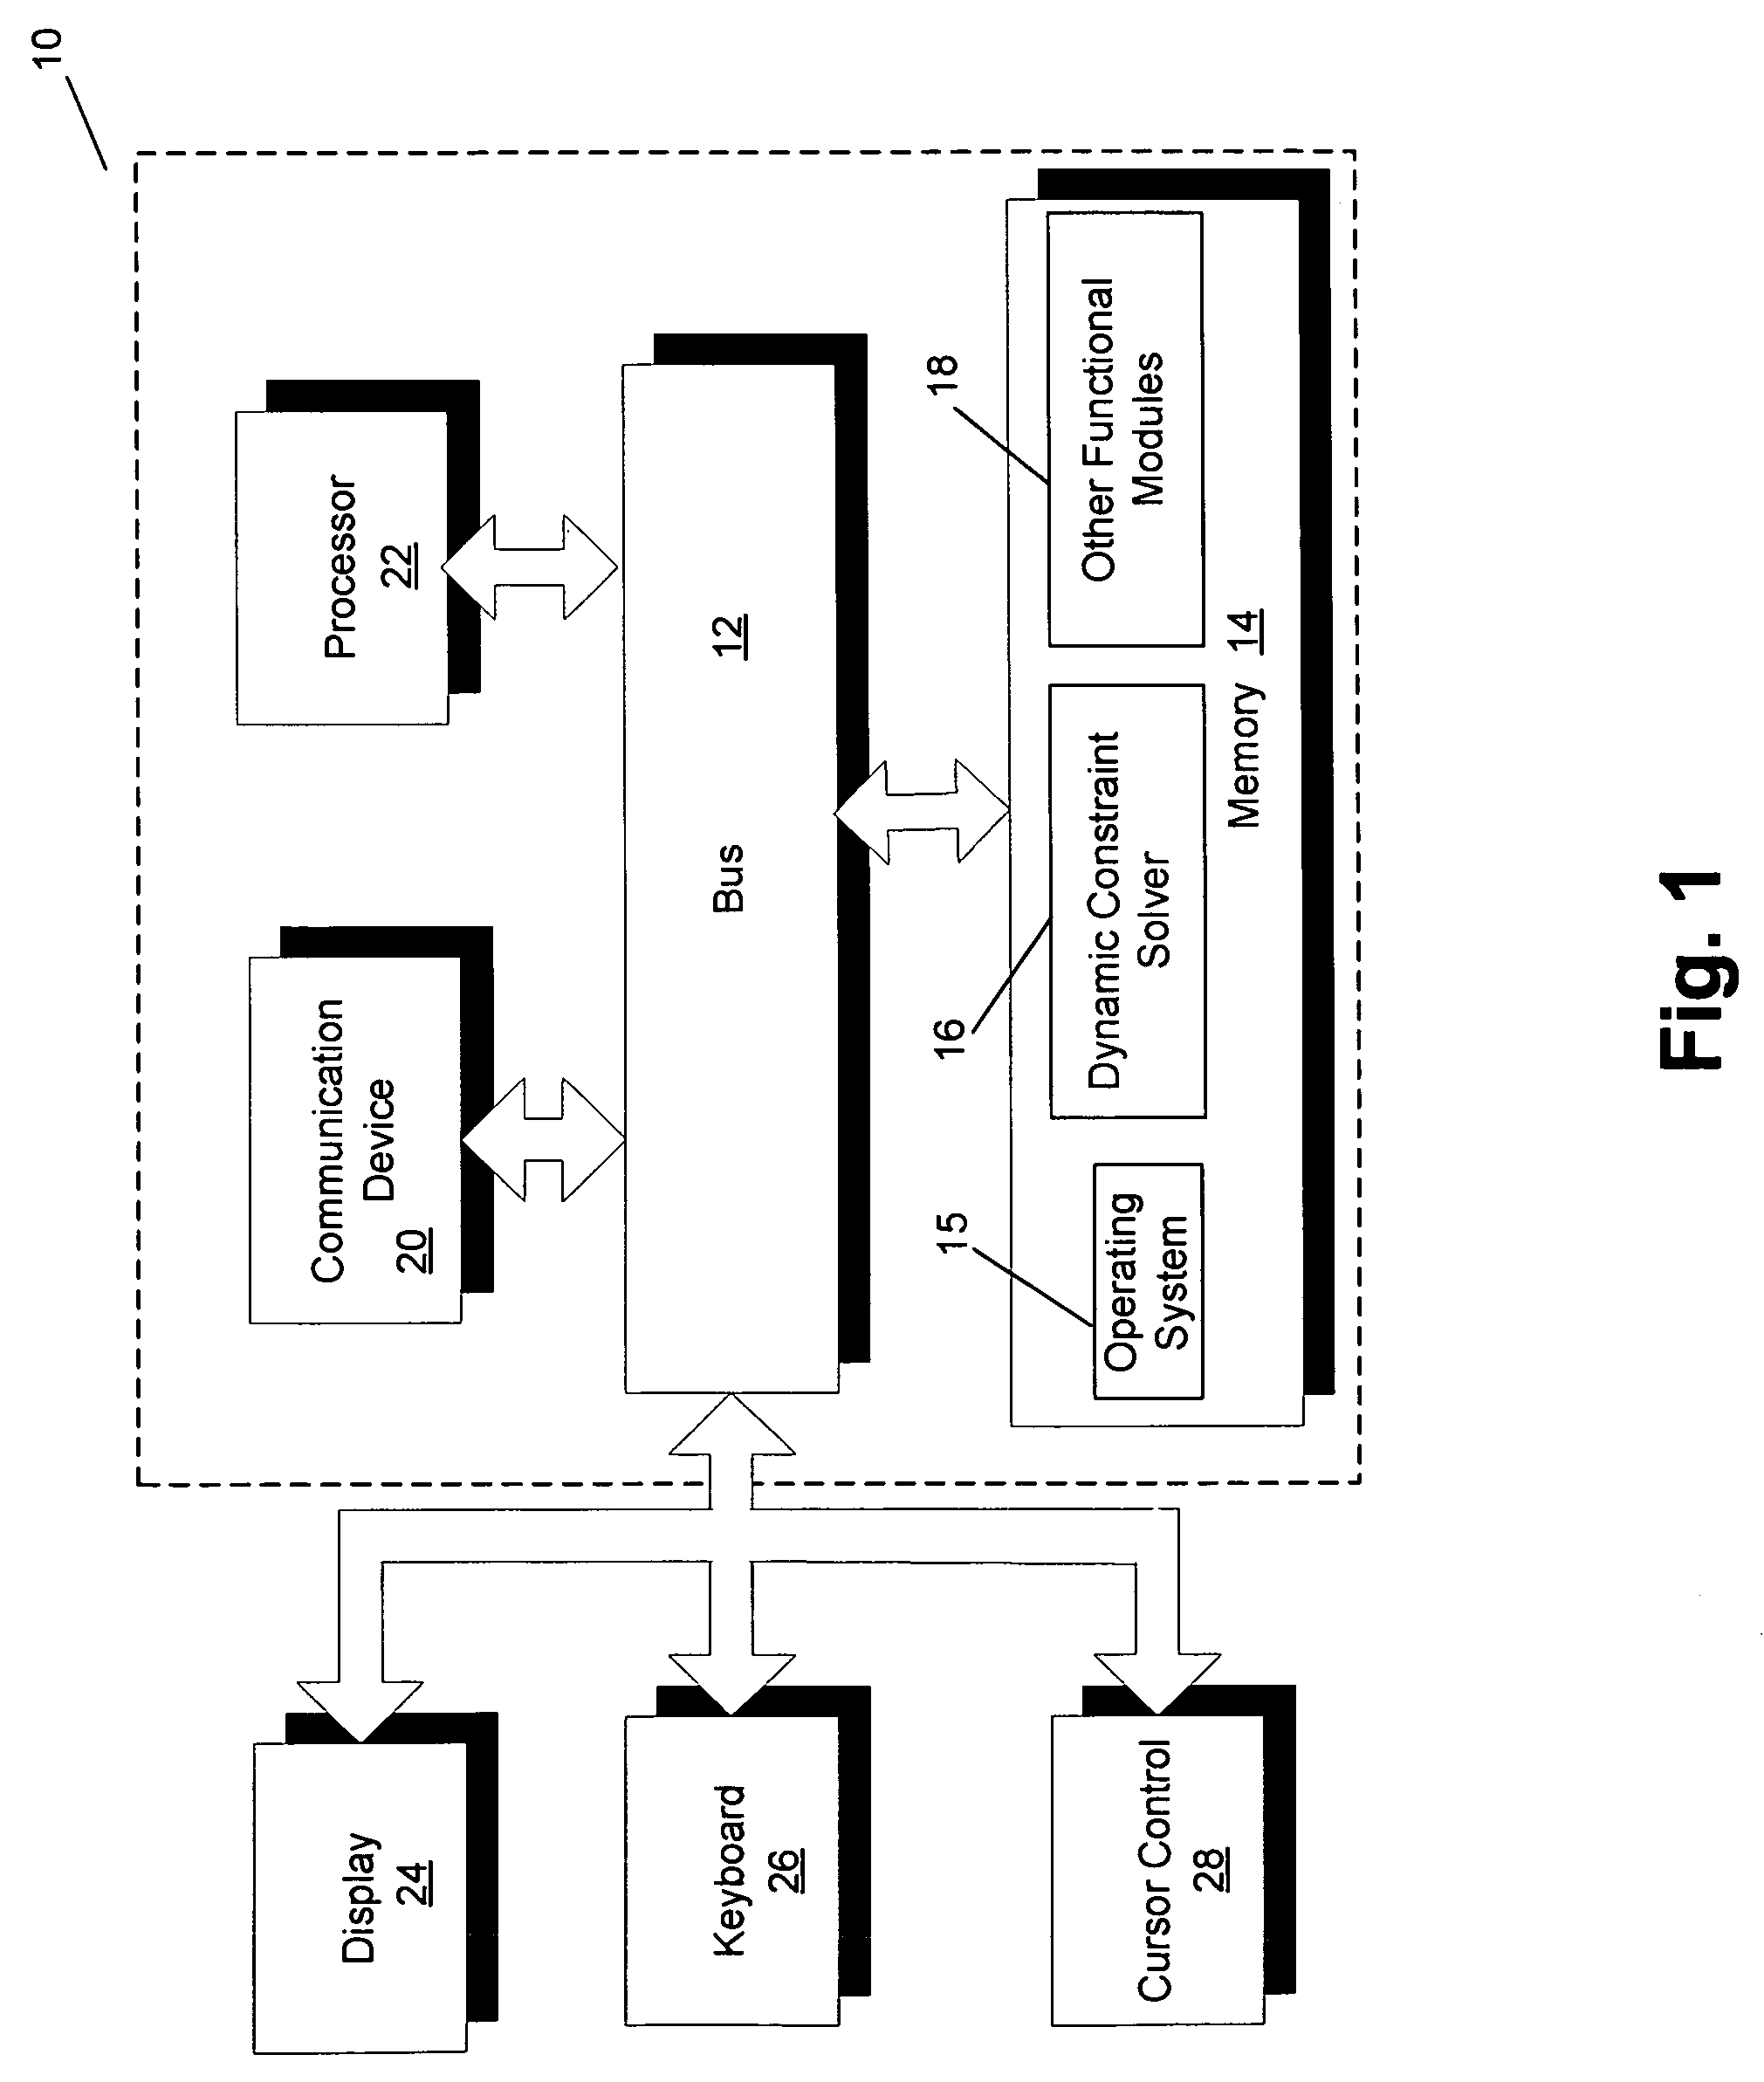 Dynamic constraint satisfaction problem solver with inferred problem association removal